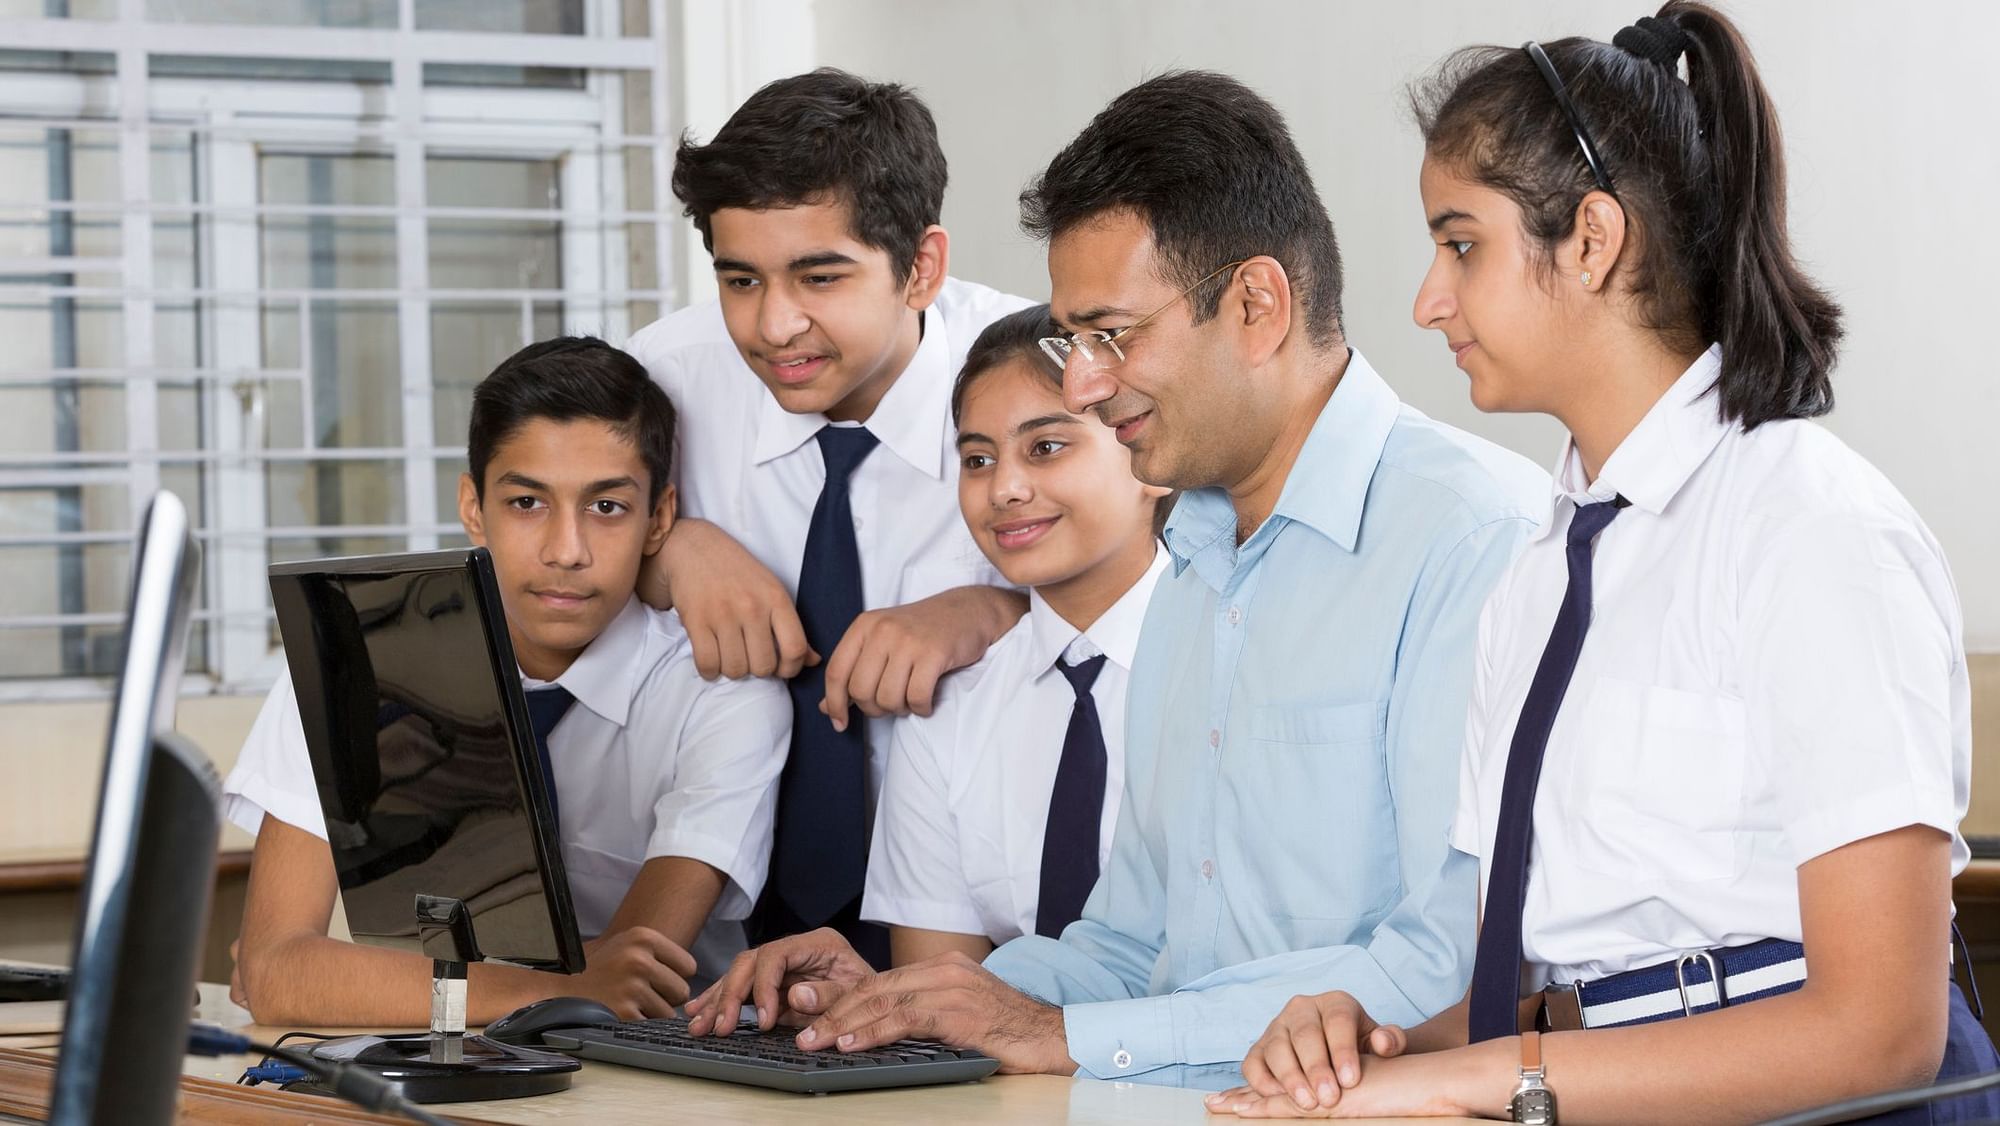 Technology is playing a pivotal role in the K-12 education space in India.